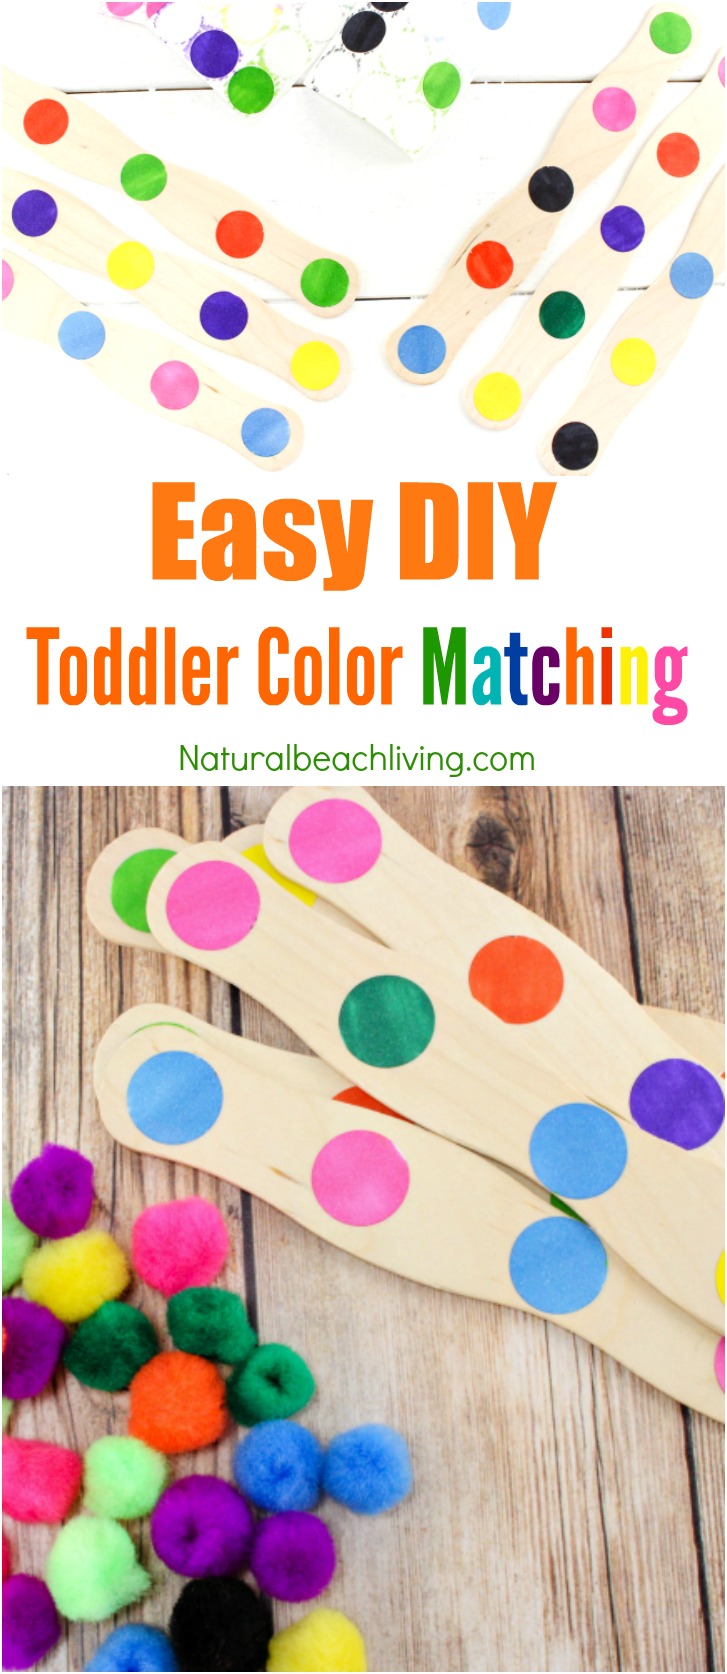 Easy DIY Color Activity for Preschool and Toddler age children, Toddler color activities, fine motor skills, color matching activity, Teaching colors 